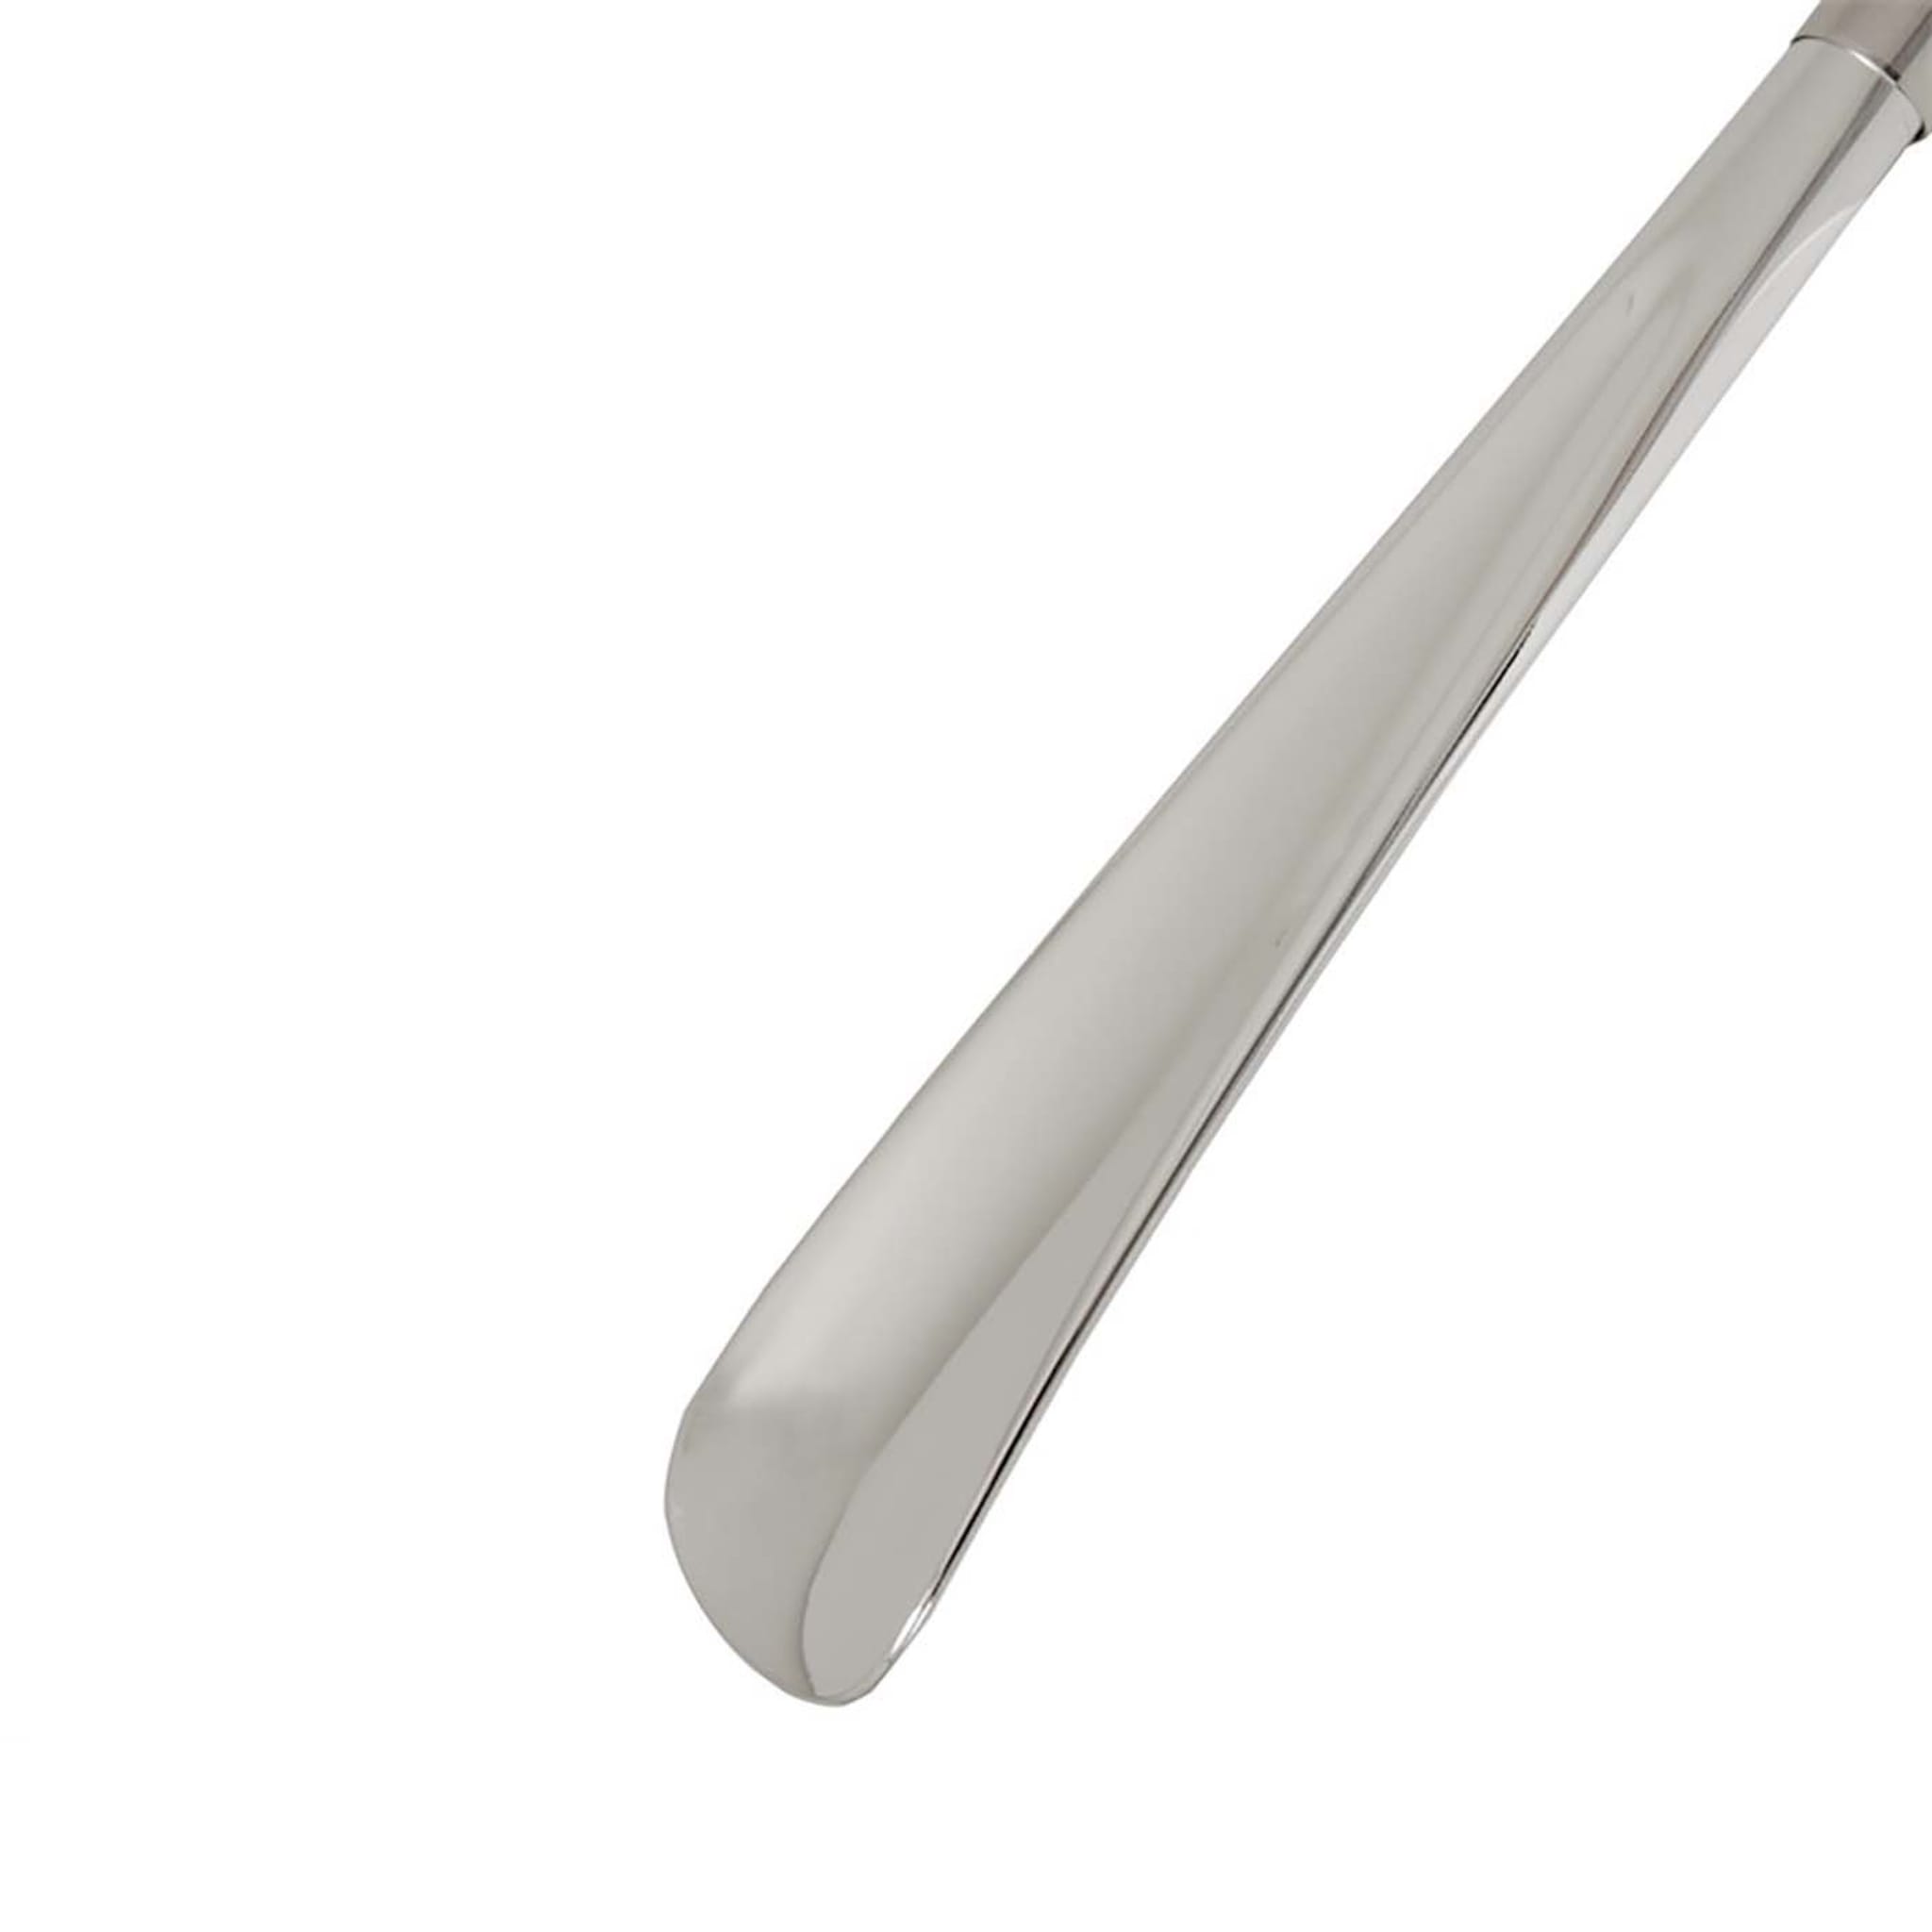 Silver Eagle Shoehorn - Alternative view 3